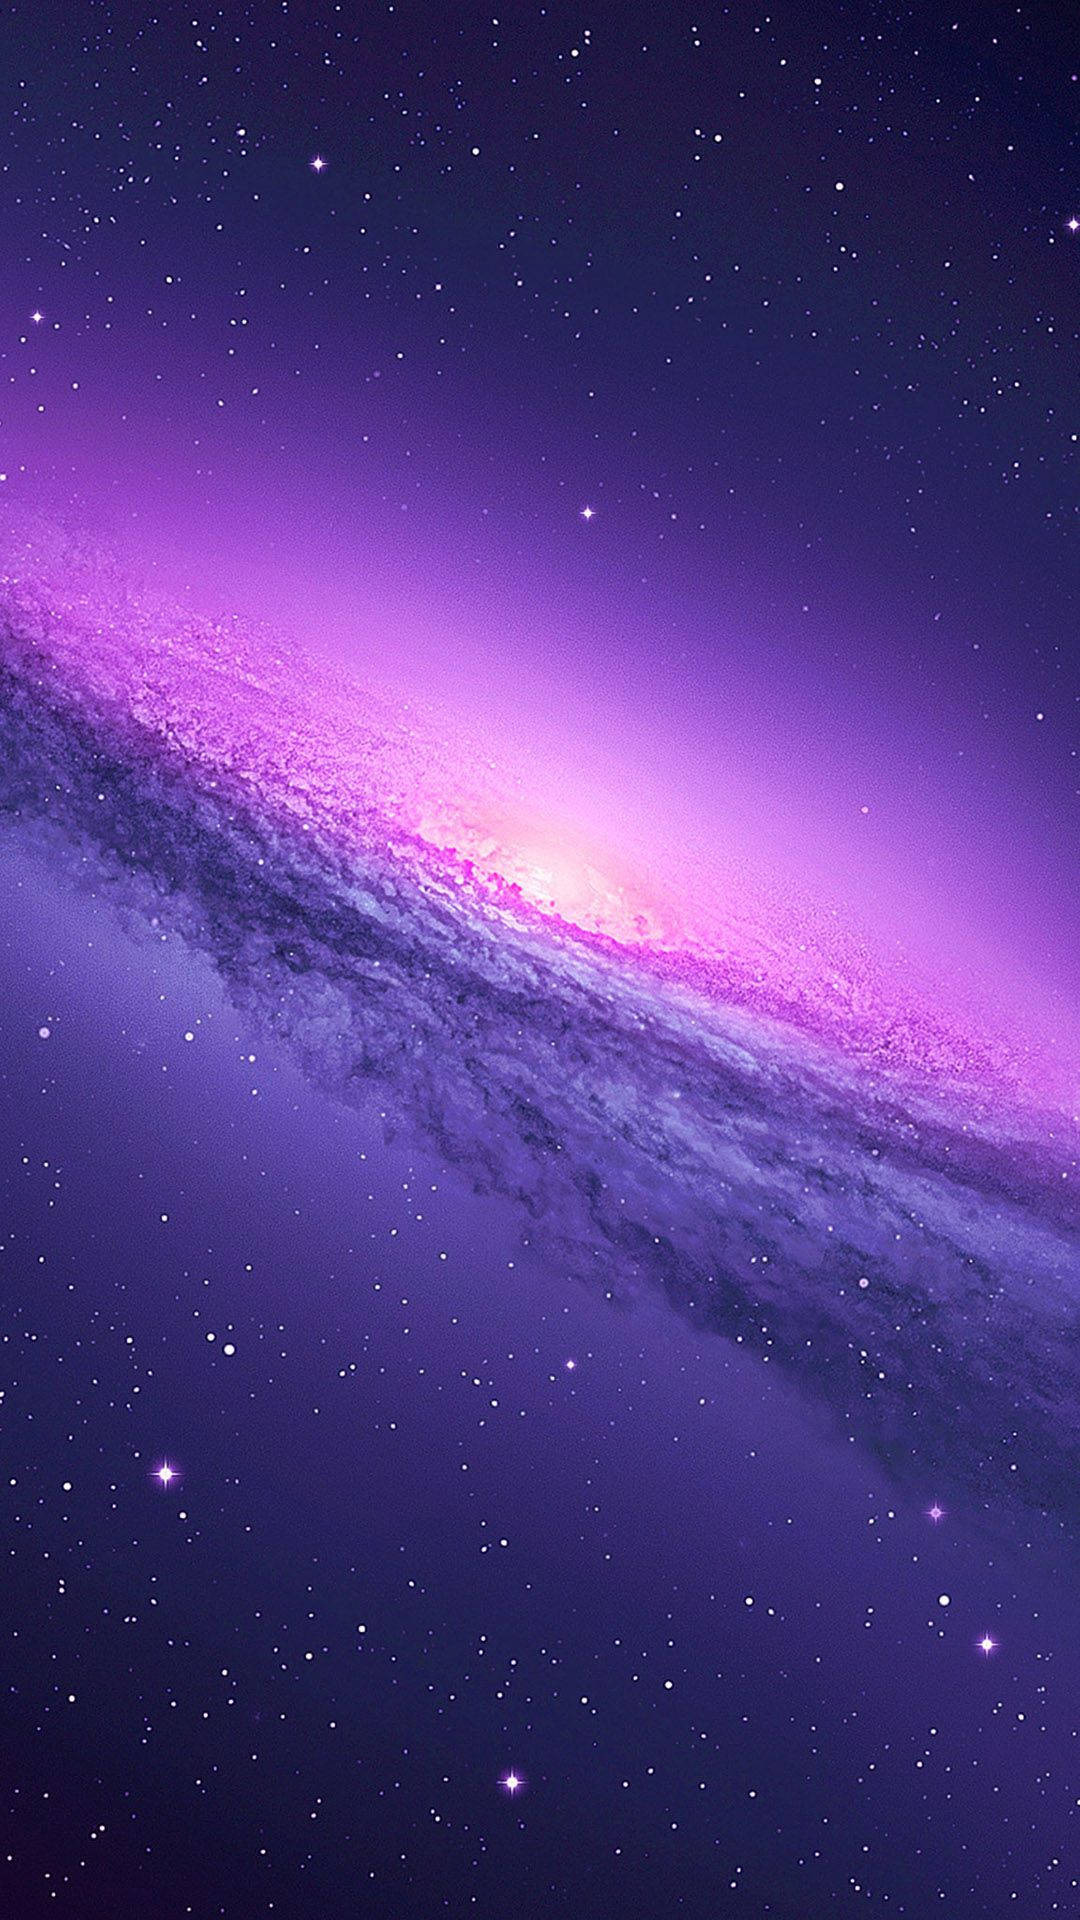 https://wallpapers.com/images/hd/beautiful-cool-purple-galaxy-w235qy6yagxw952t.jpg